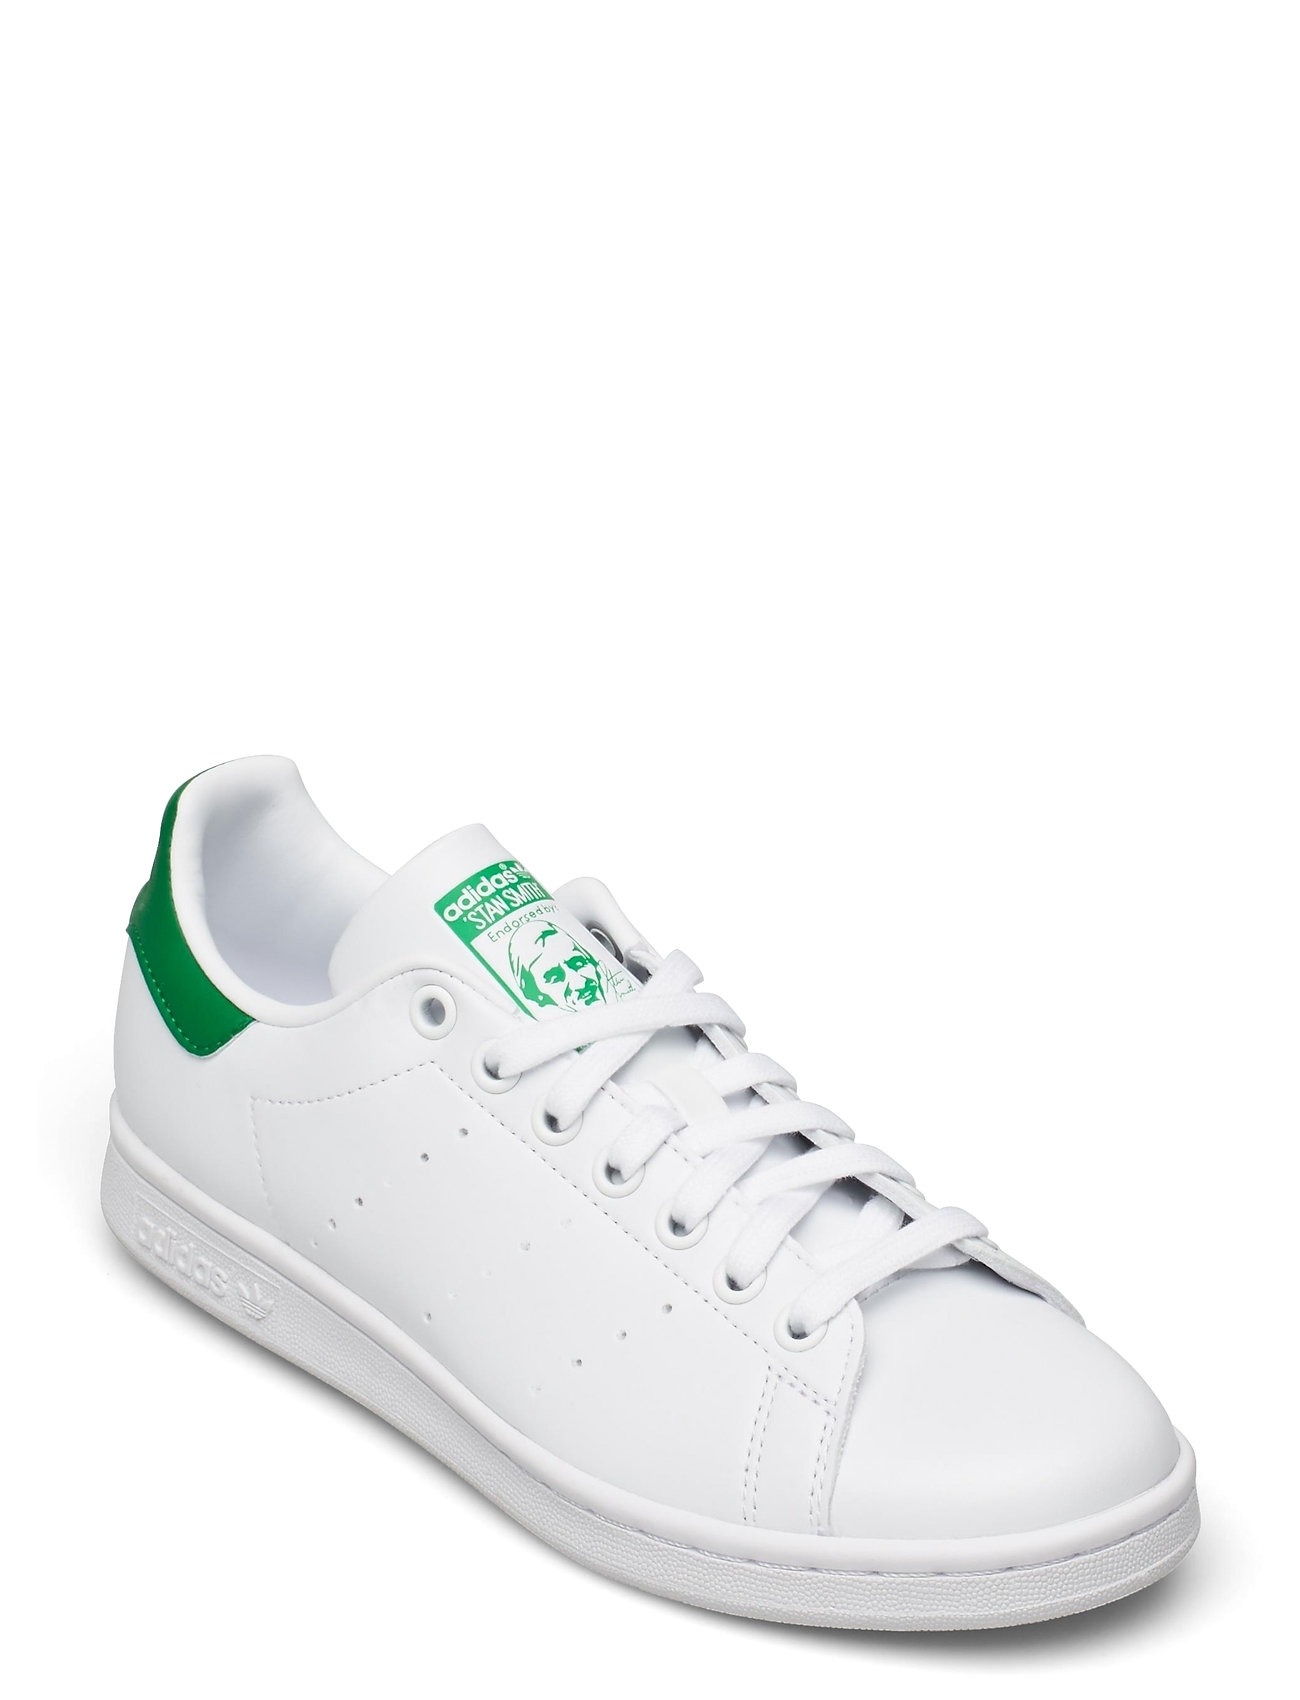 Stan Smith Sport Sneakers Low-top Sneakers White Adidas Originals